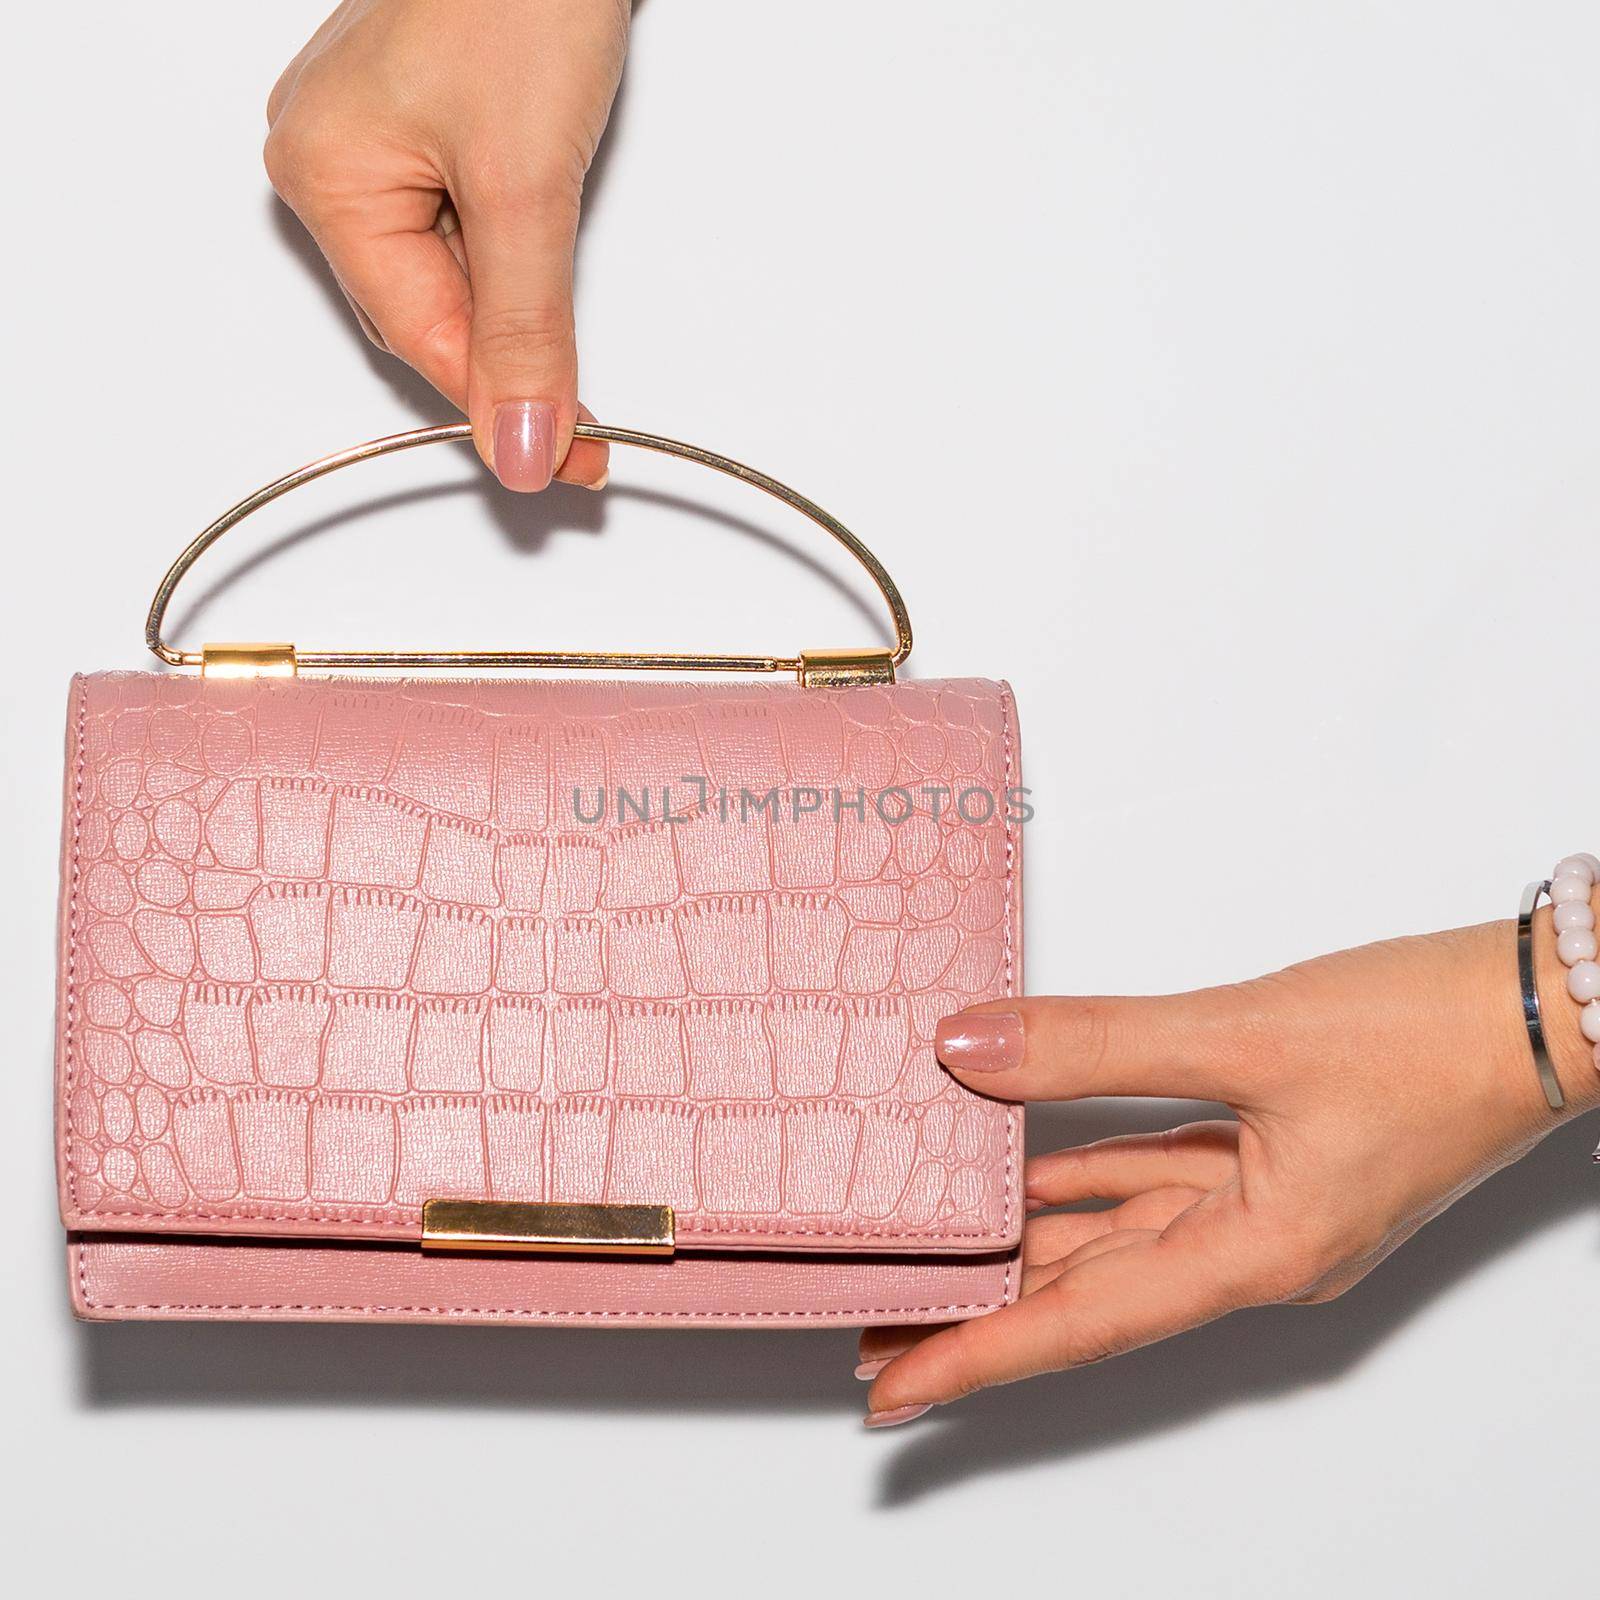 Woman holding pink leather handbag close-up by ferhad